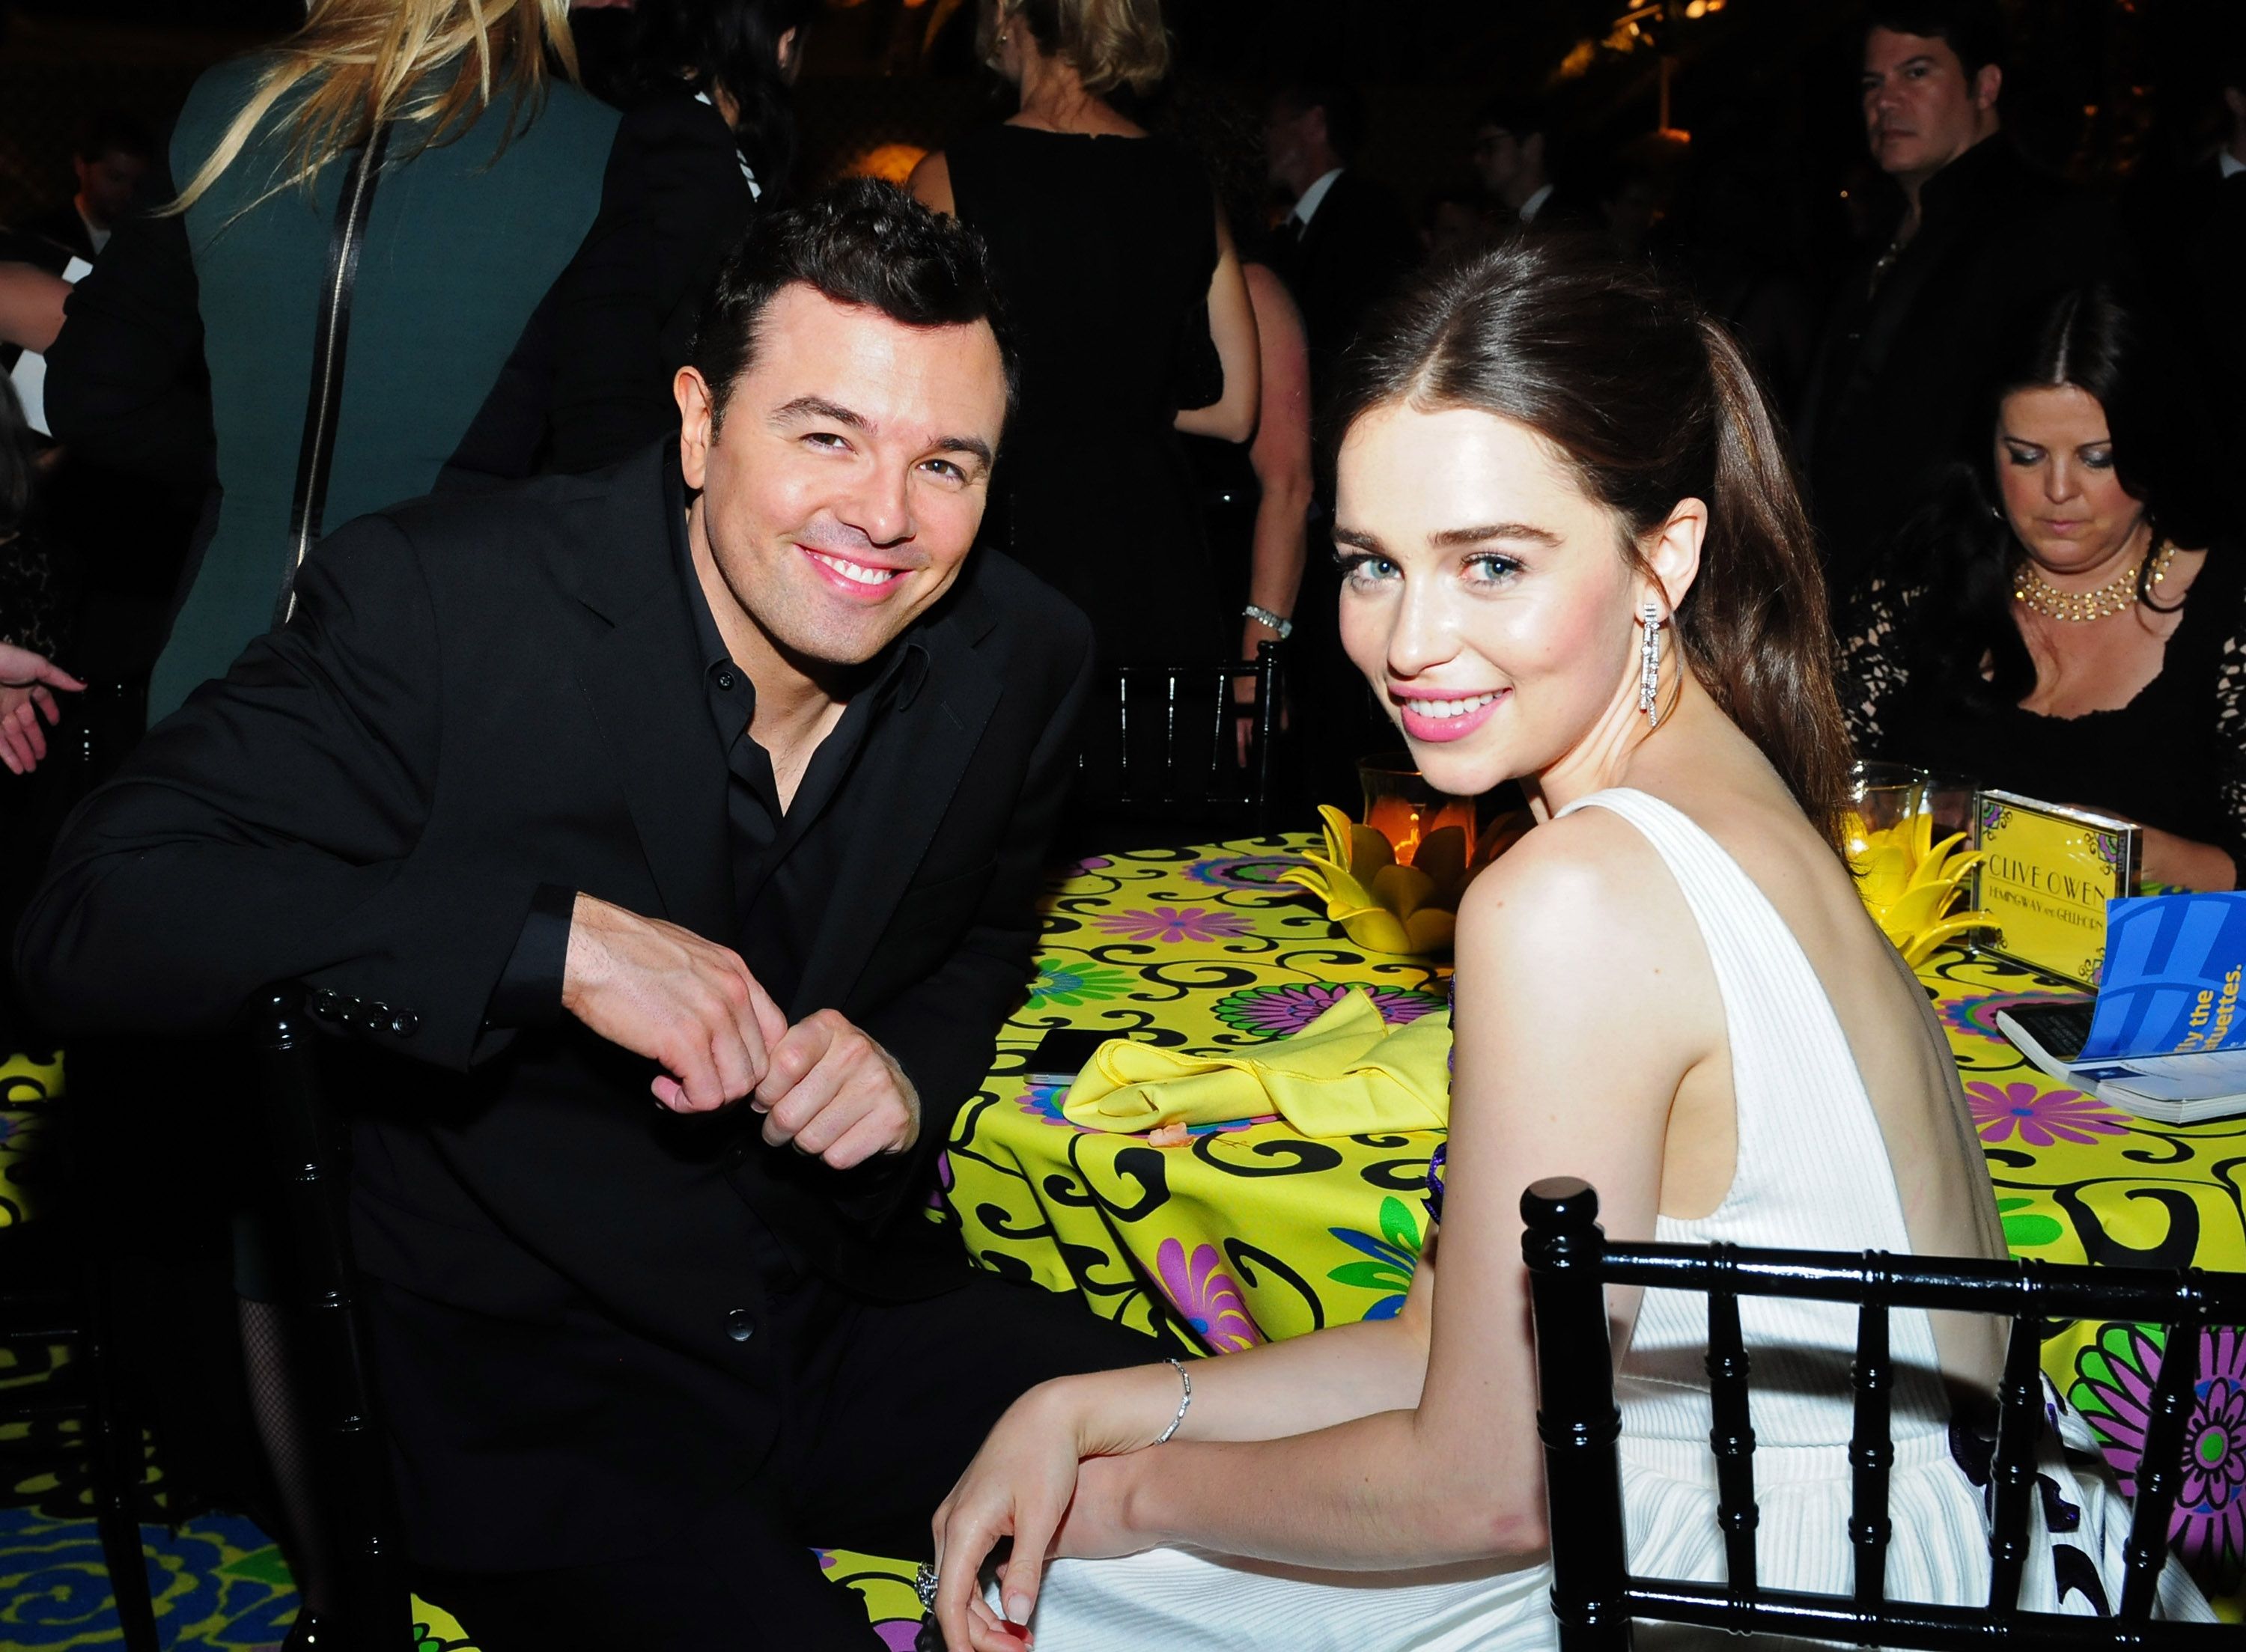 Seth MacFarlane and Emilia Clarke during HBO's official Emmy After-Party at The Plaza at the Pacific Design Center on September 23, 2012 in Los Angeles, California. | Source: Getty Images